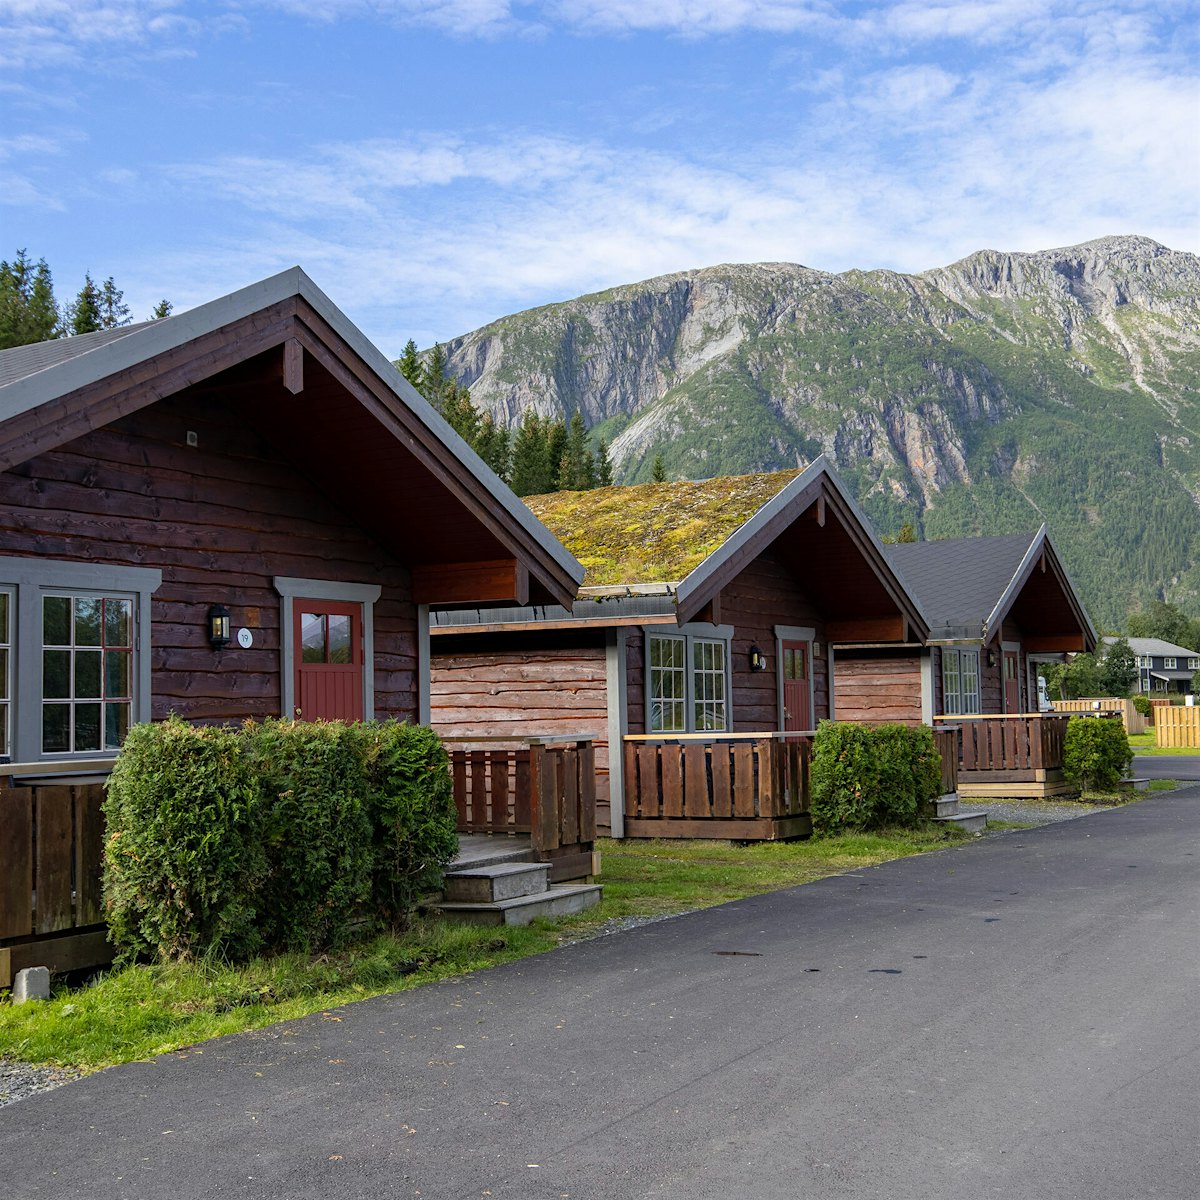 Three log cabins with grass on the roof and green lawn around, with mountains in the background. Photo